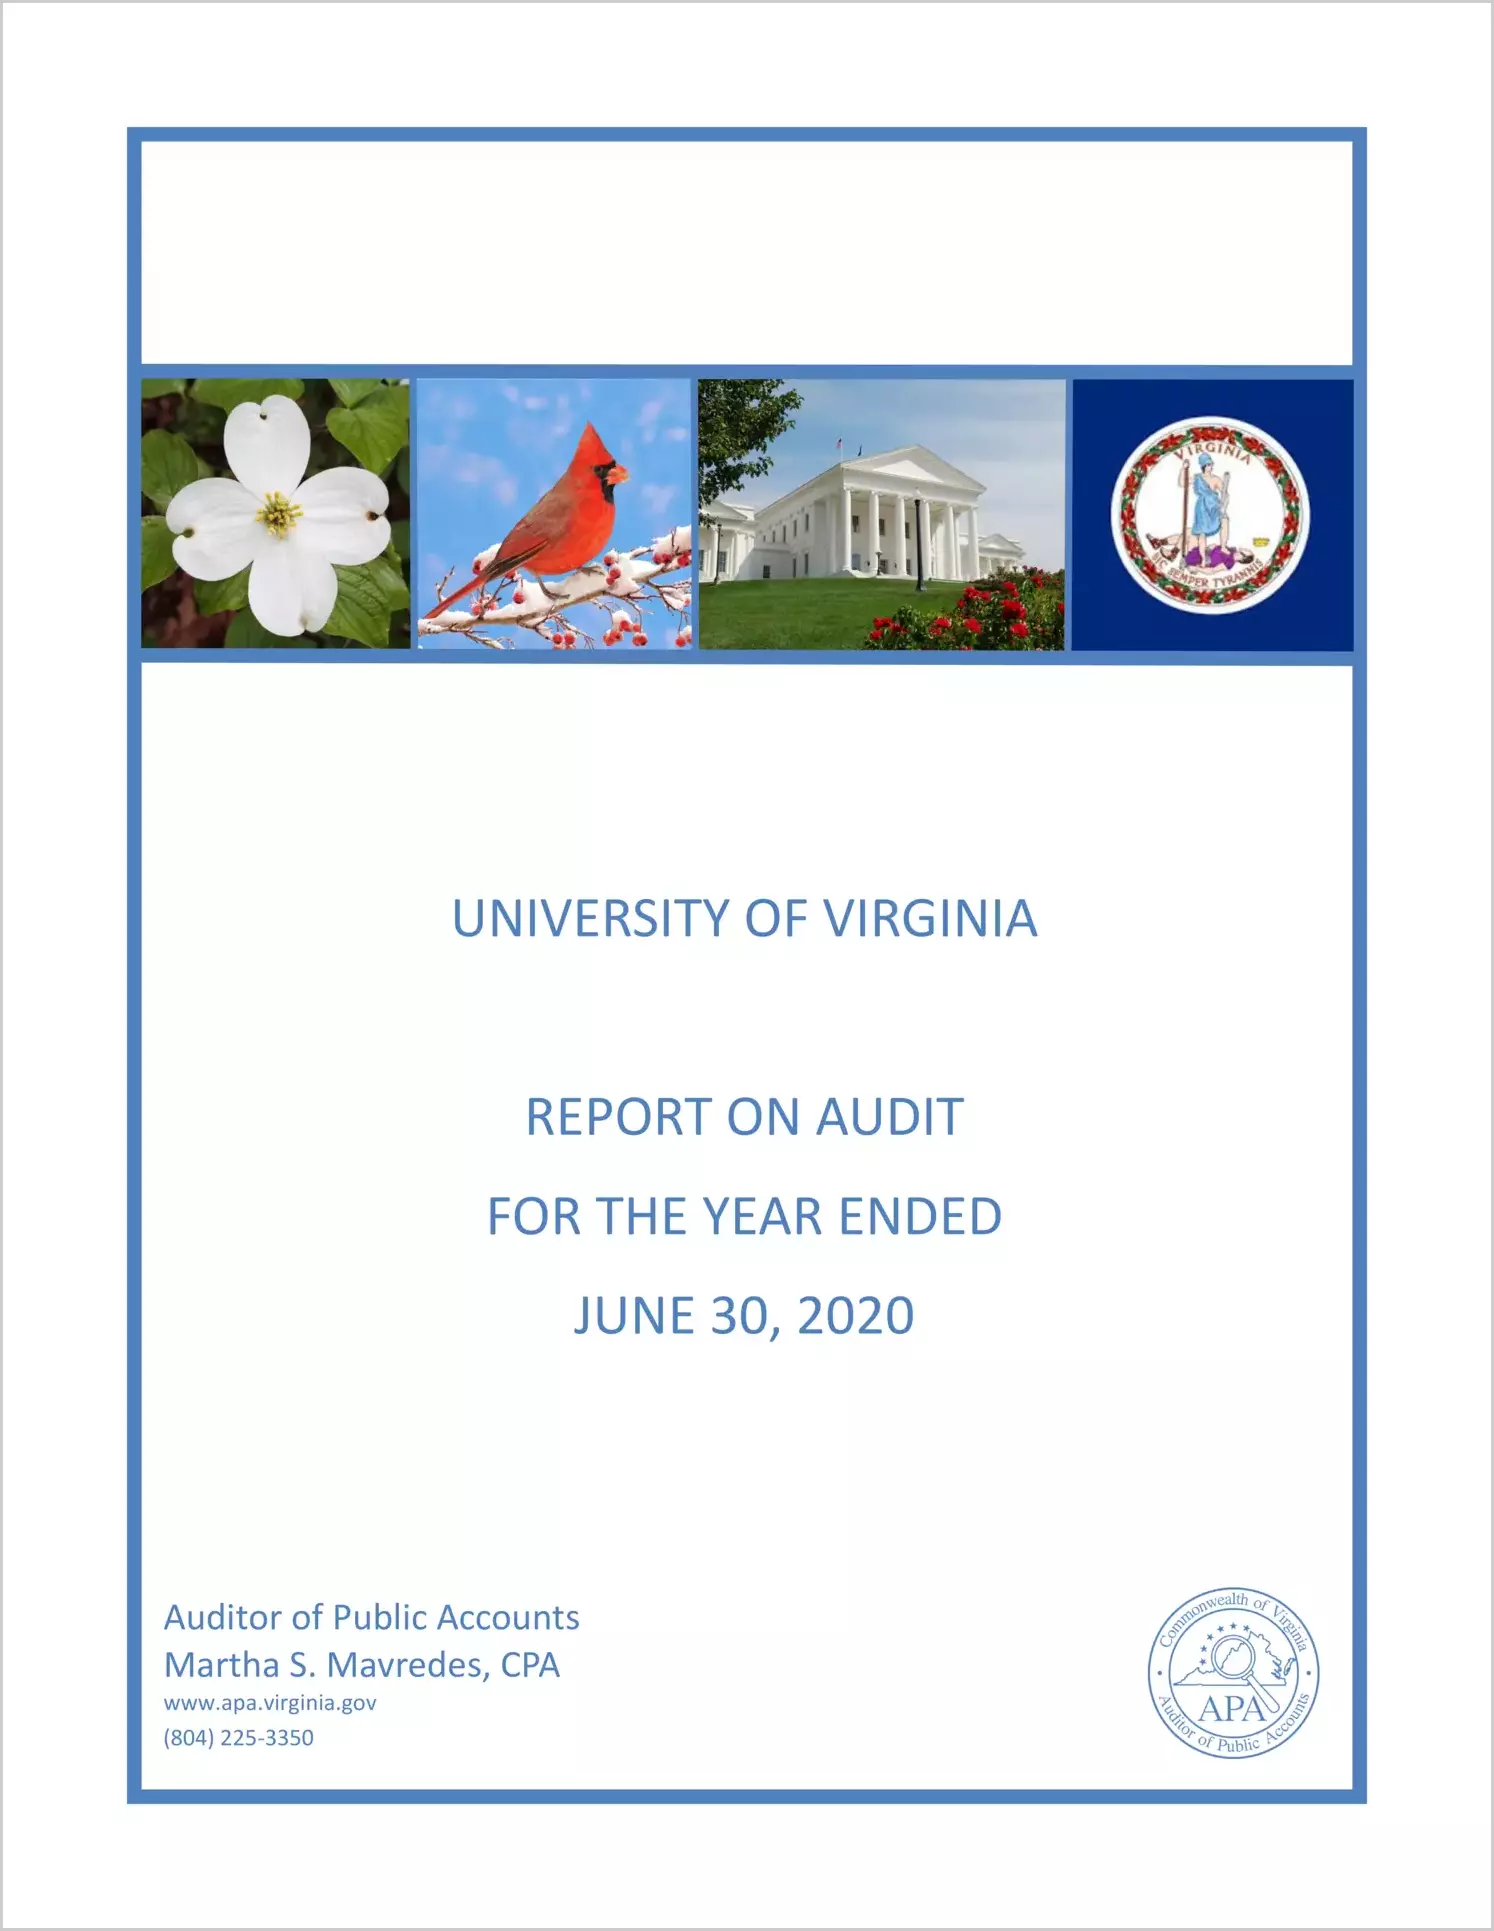 University of Virginia for the year ended June 30, 2020